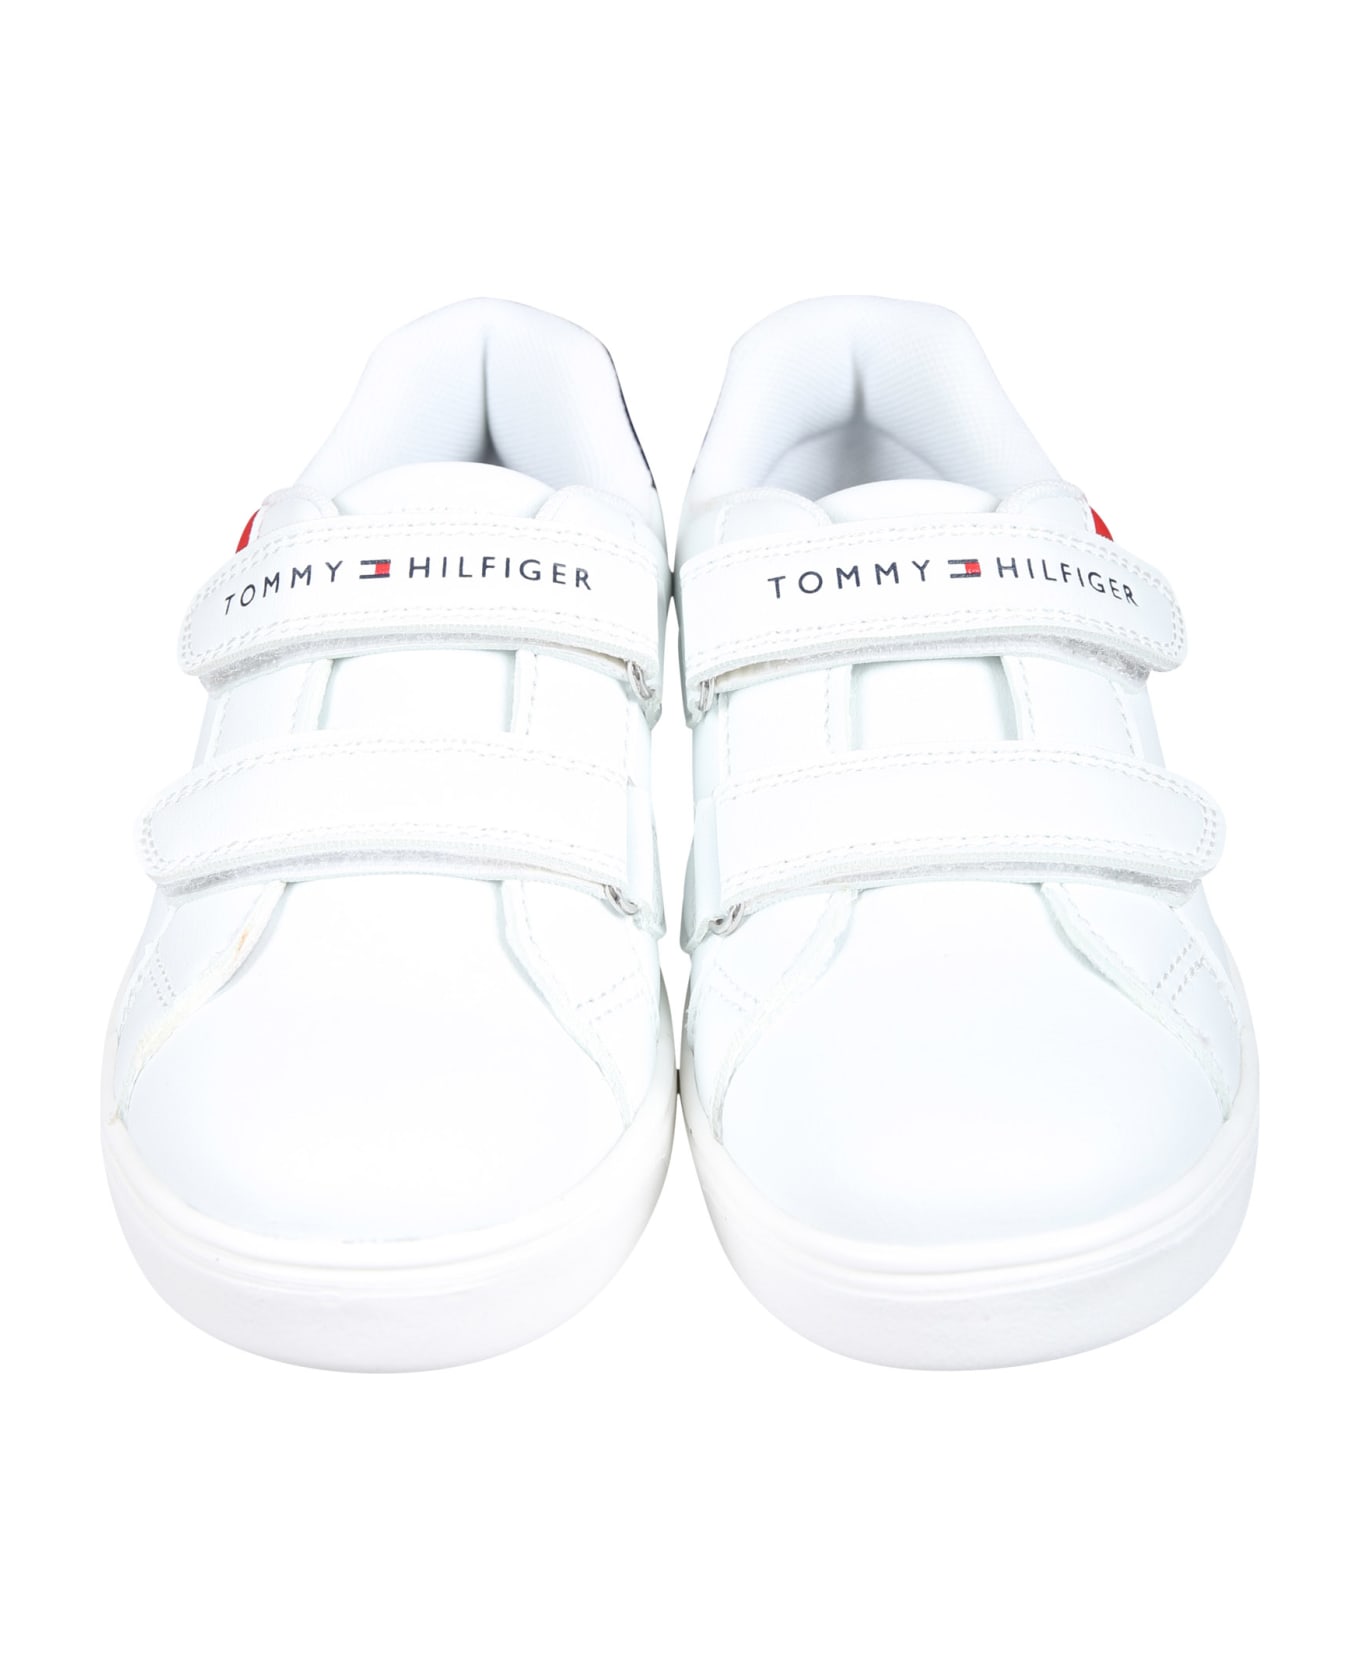 Tommy Hilfiger White Sneakers For Kids With Flag And Logo - White シューズ